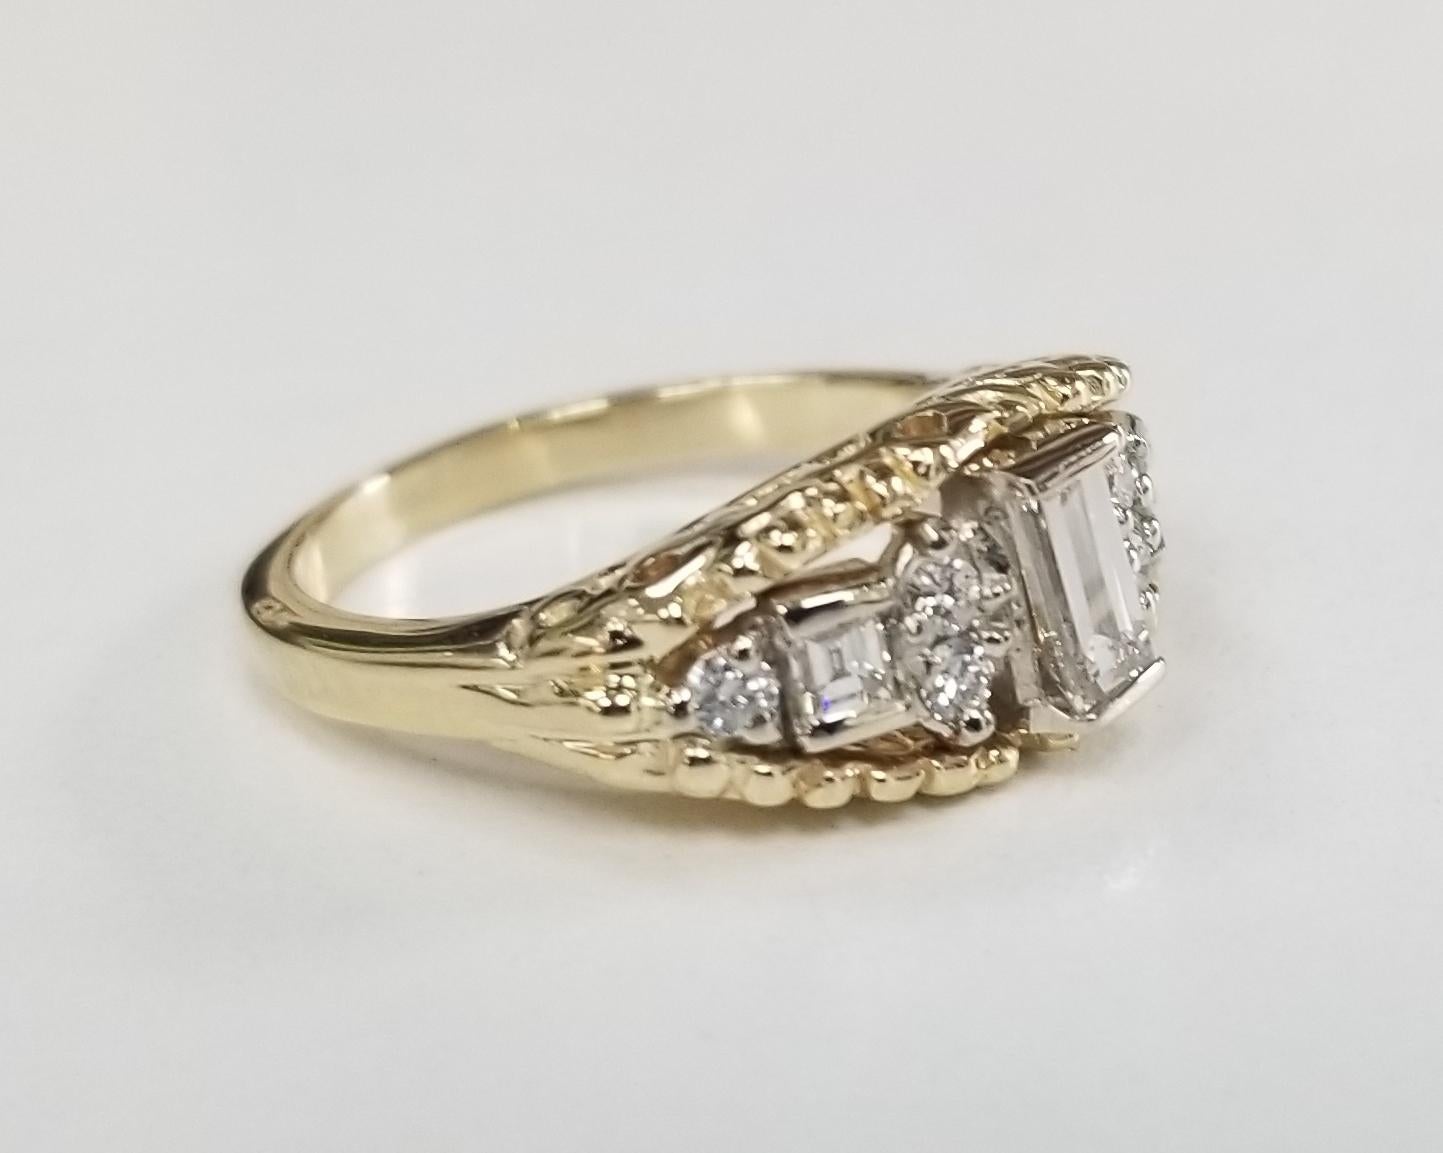 14k yellow gold diamond emerald cut diamond ring with white gold insert
 Specifications:
    MAIN stone: Diamond Emerald cut .35pts.
    SIDE STONE: 8 PCS Diamonds 0.31CTW    
    COLOR/clarity: G/VS2  
    metal: 14K YELLOW GOLD
    type: RING
   